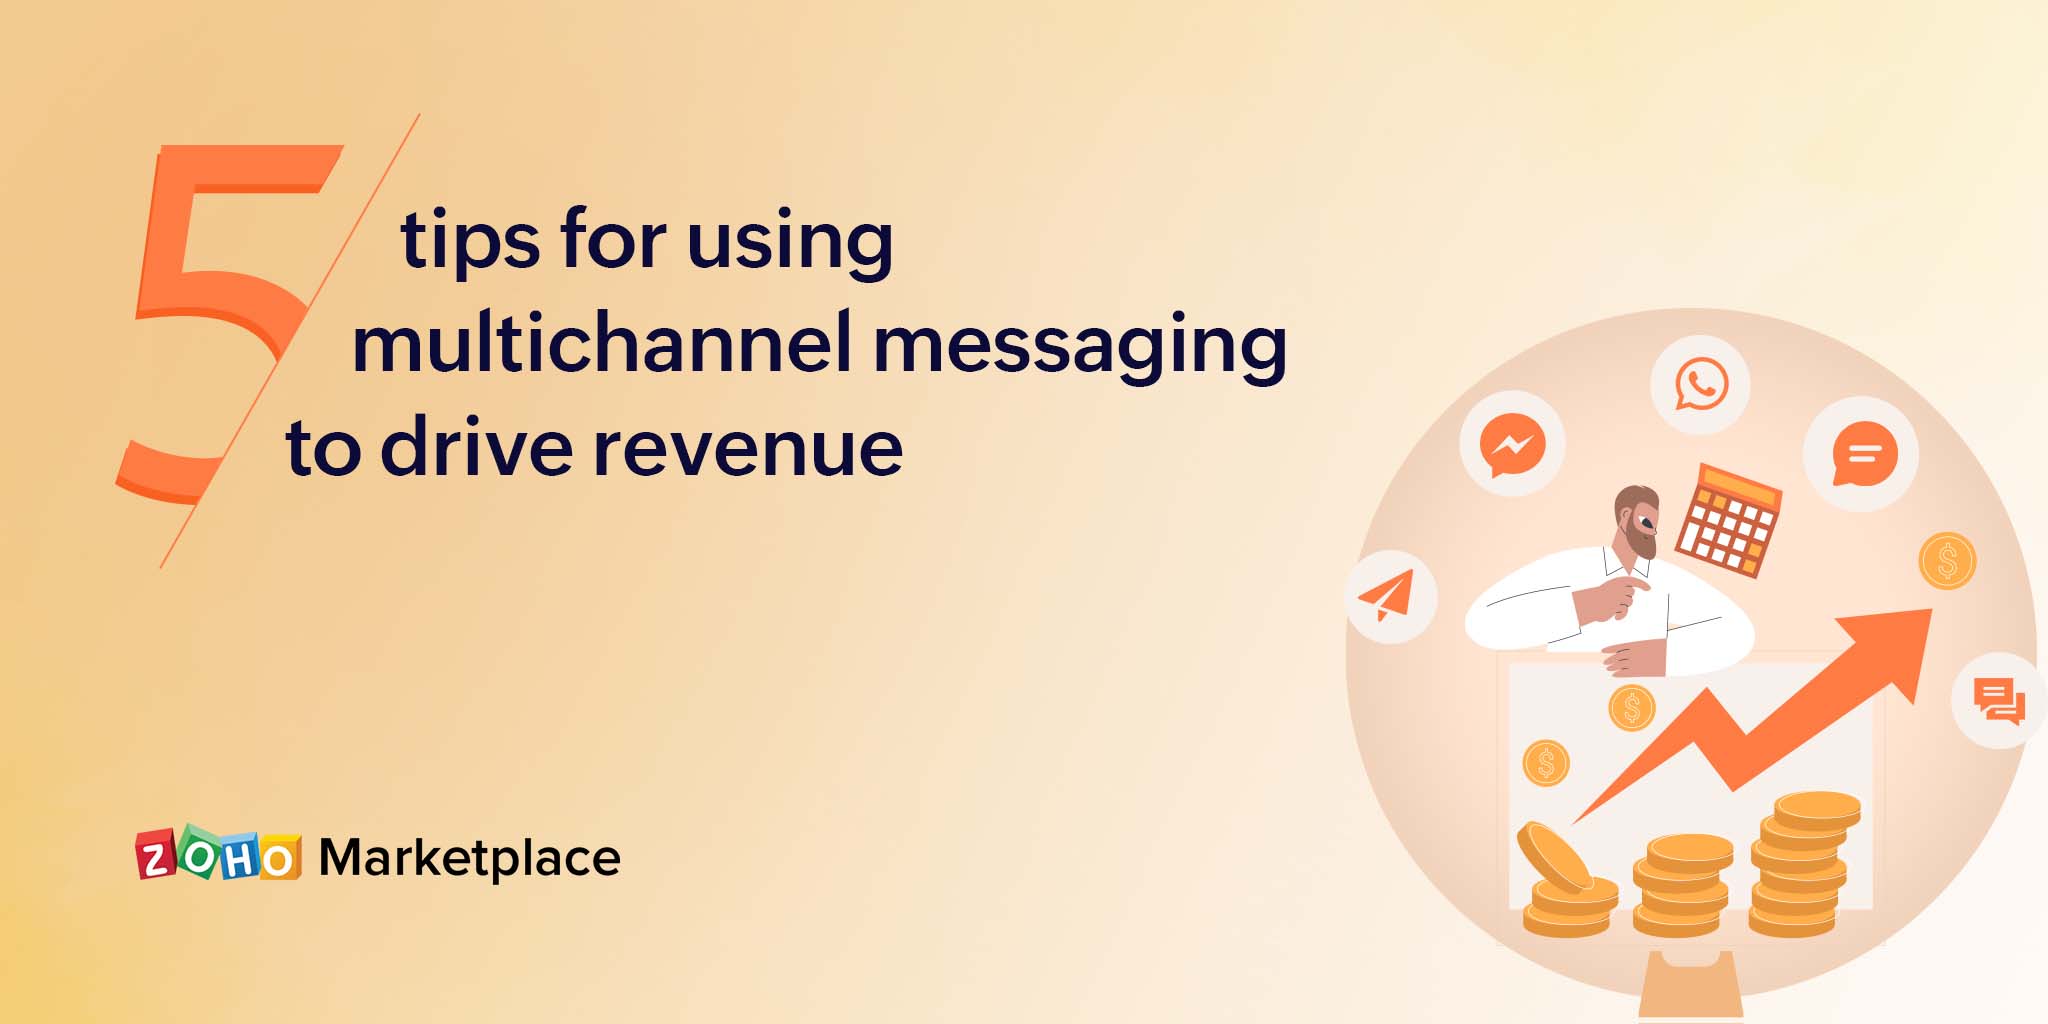 5 tips for using multichannel messaging to drive revenue